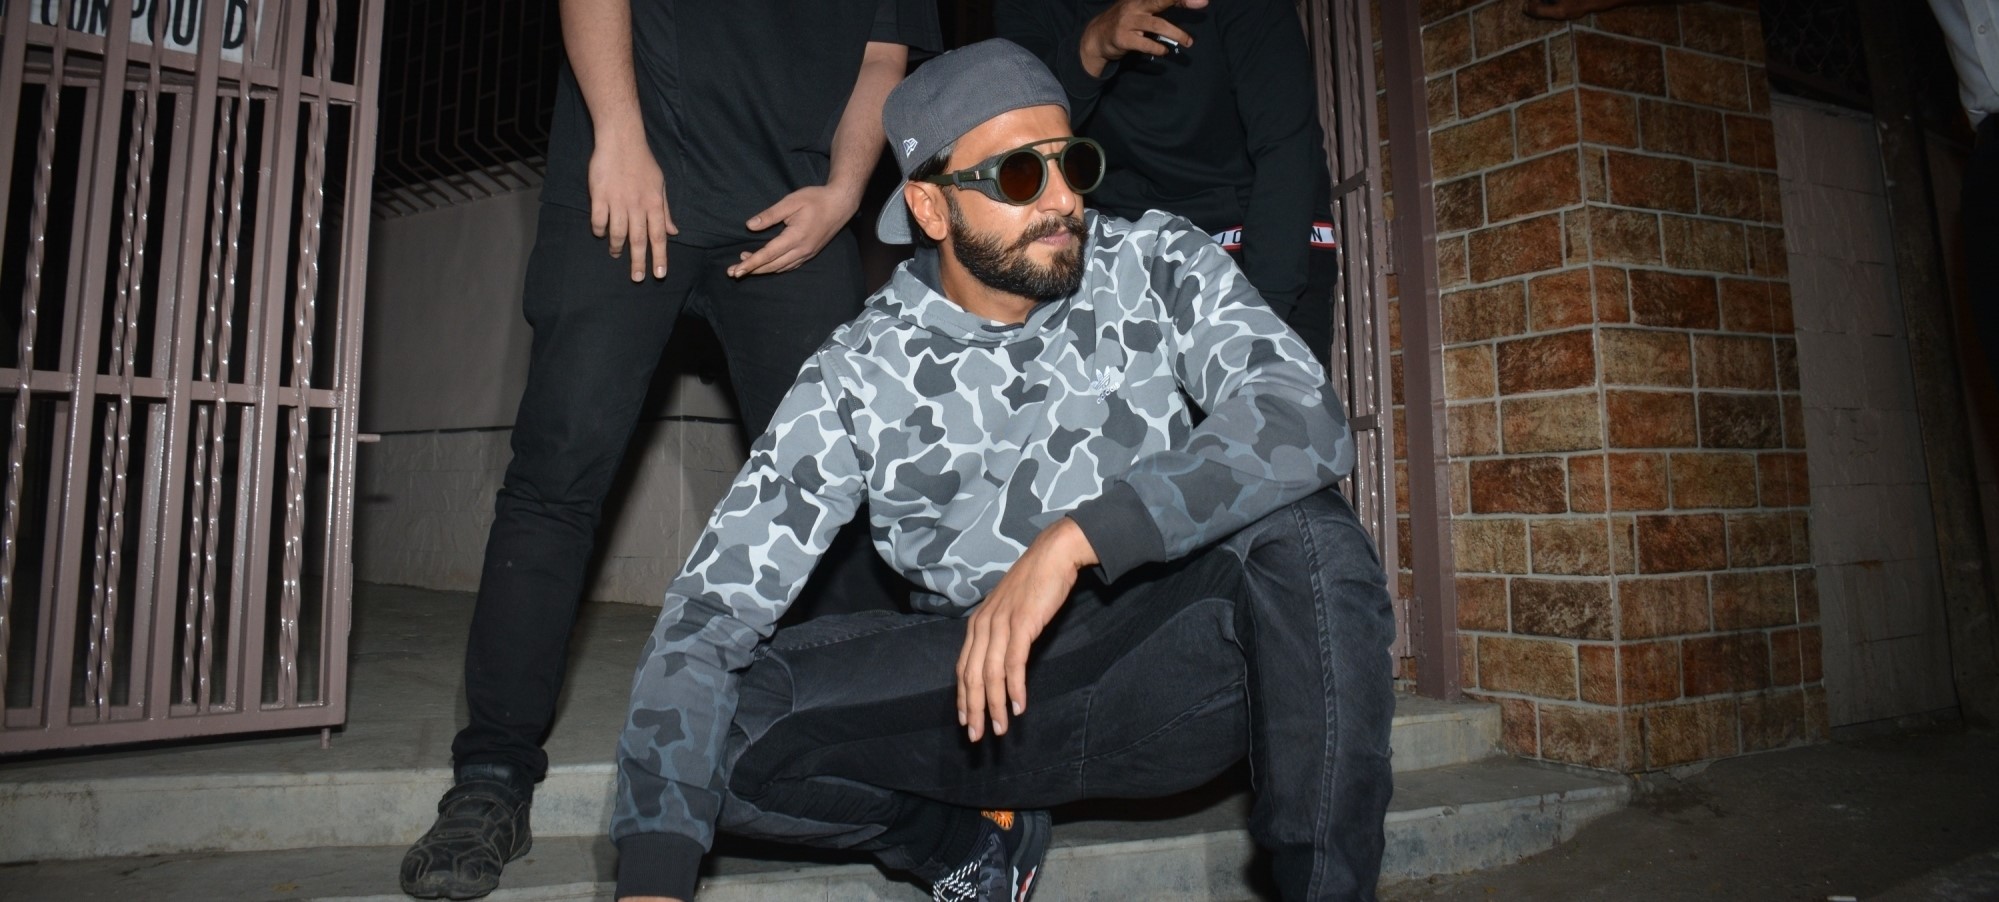 Feel the safest when I am working with Rohit Shetty: Ranveer Singh